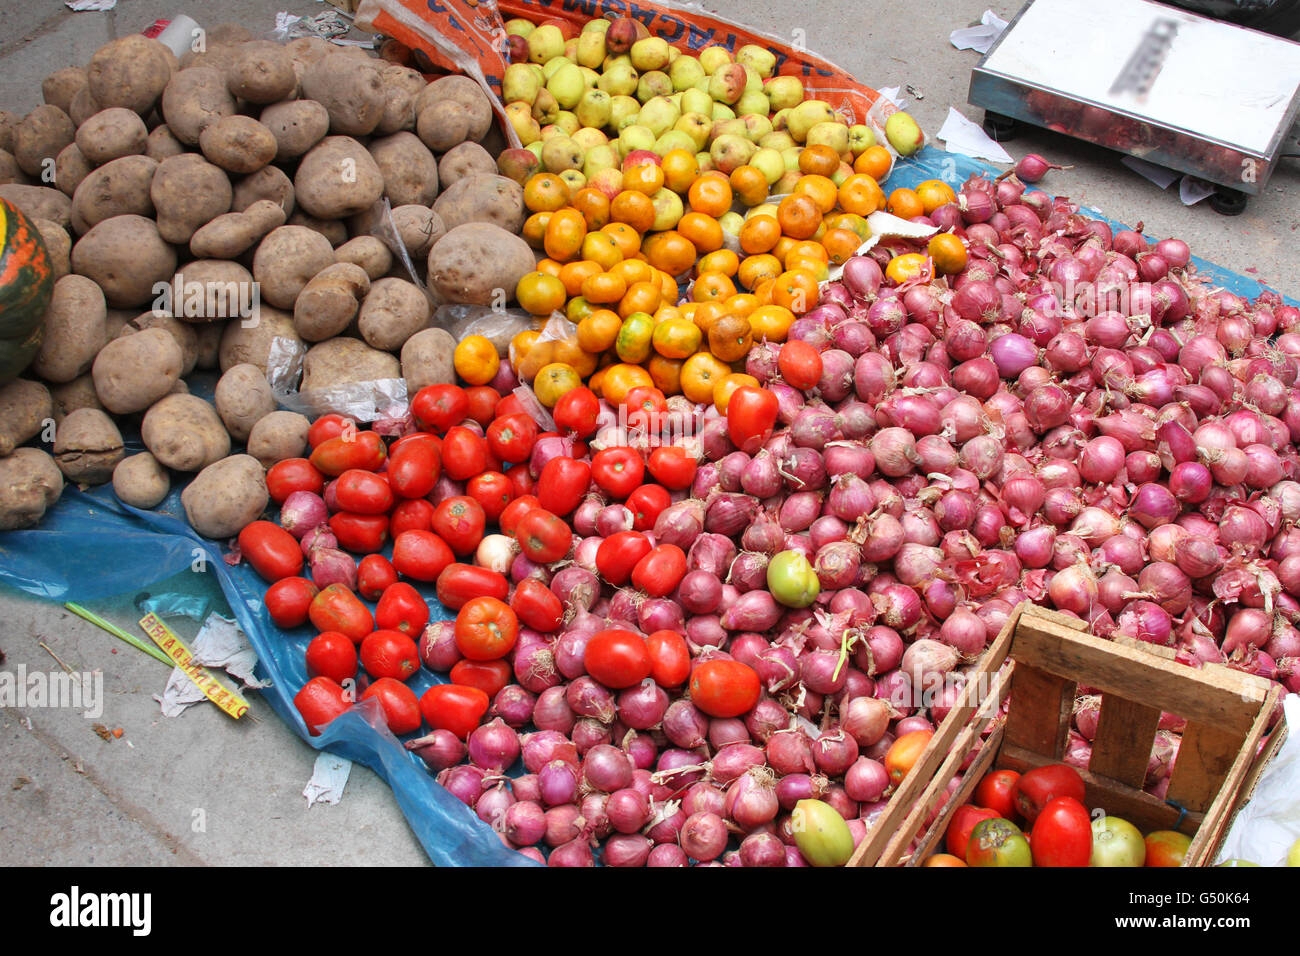 Onions, tomatoes, potatoes, apples and tangerines displayed on the ground at a Farmers' Market in Peru Stock Photo